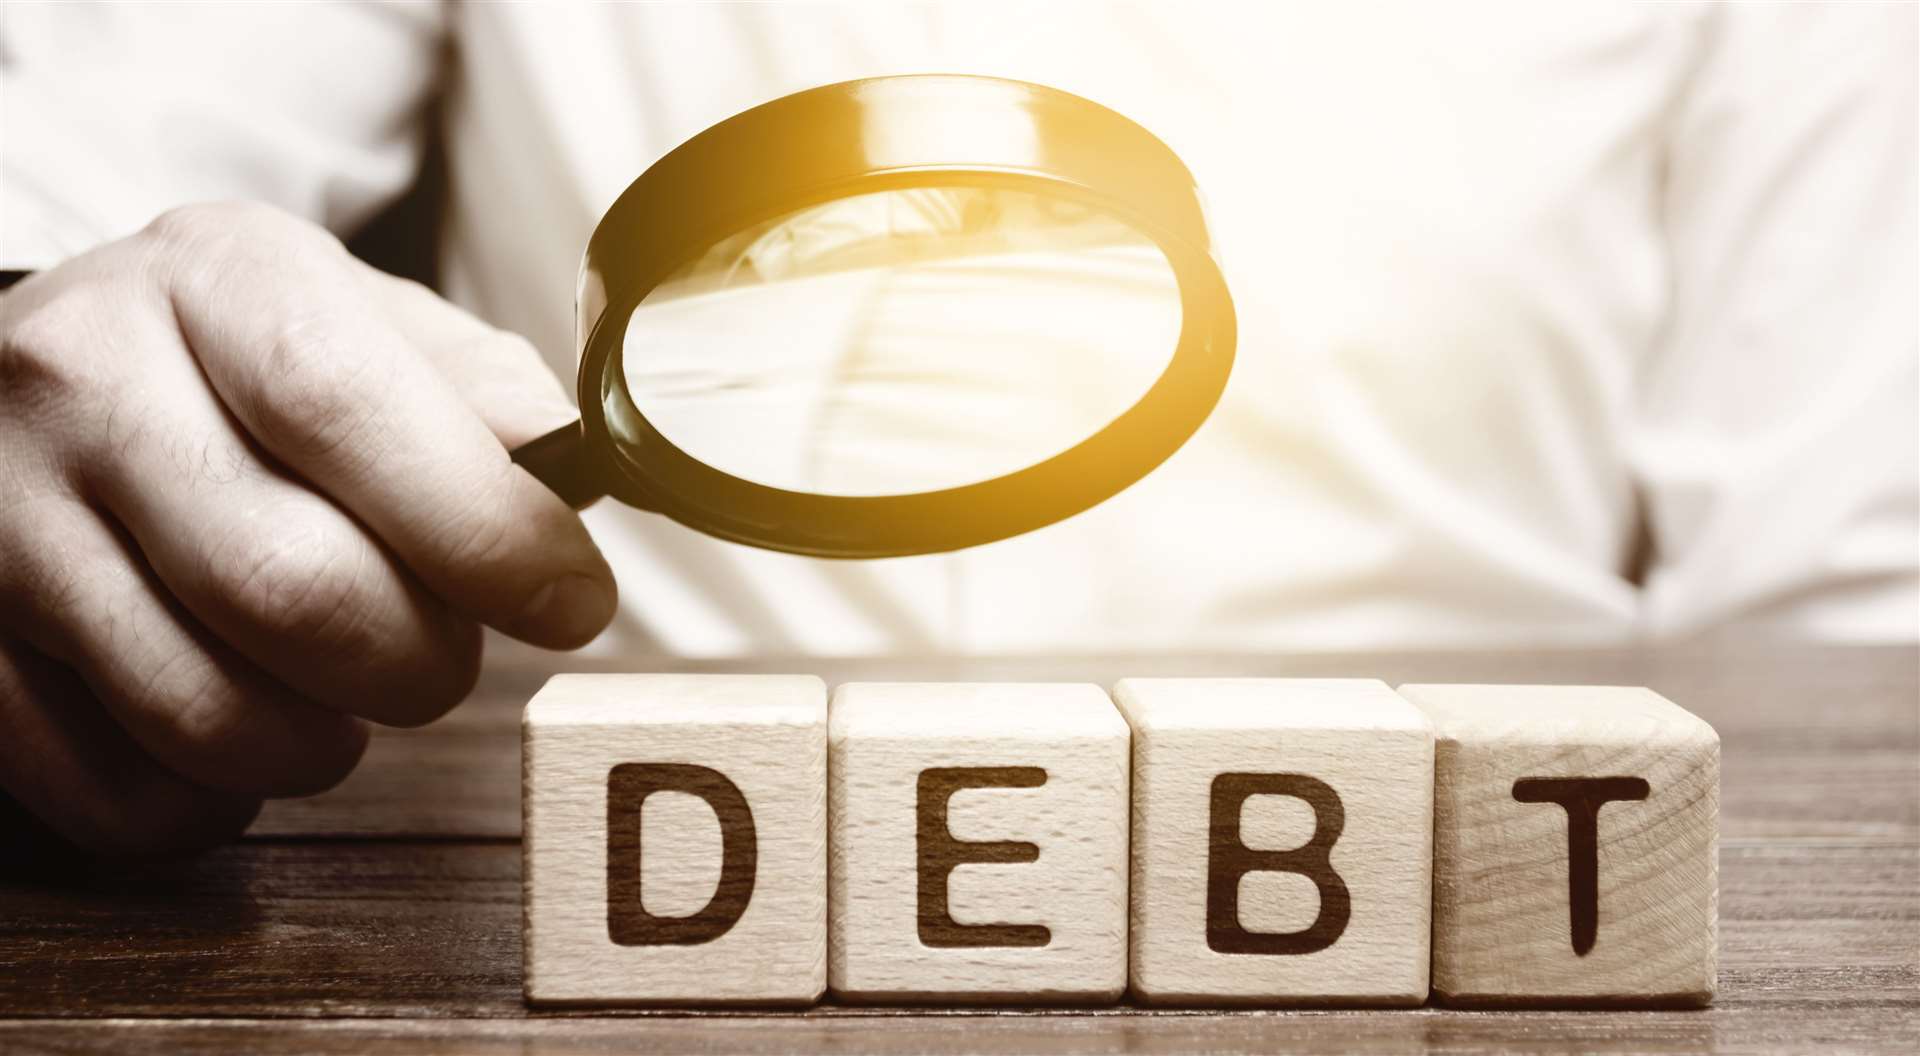 Many Scottish families are falling further in arrears, according to research from debt charity StepChange.